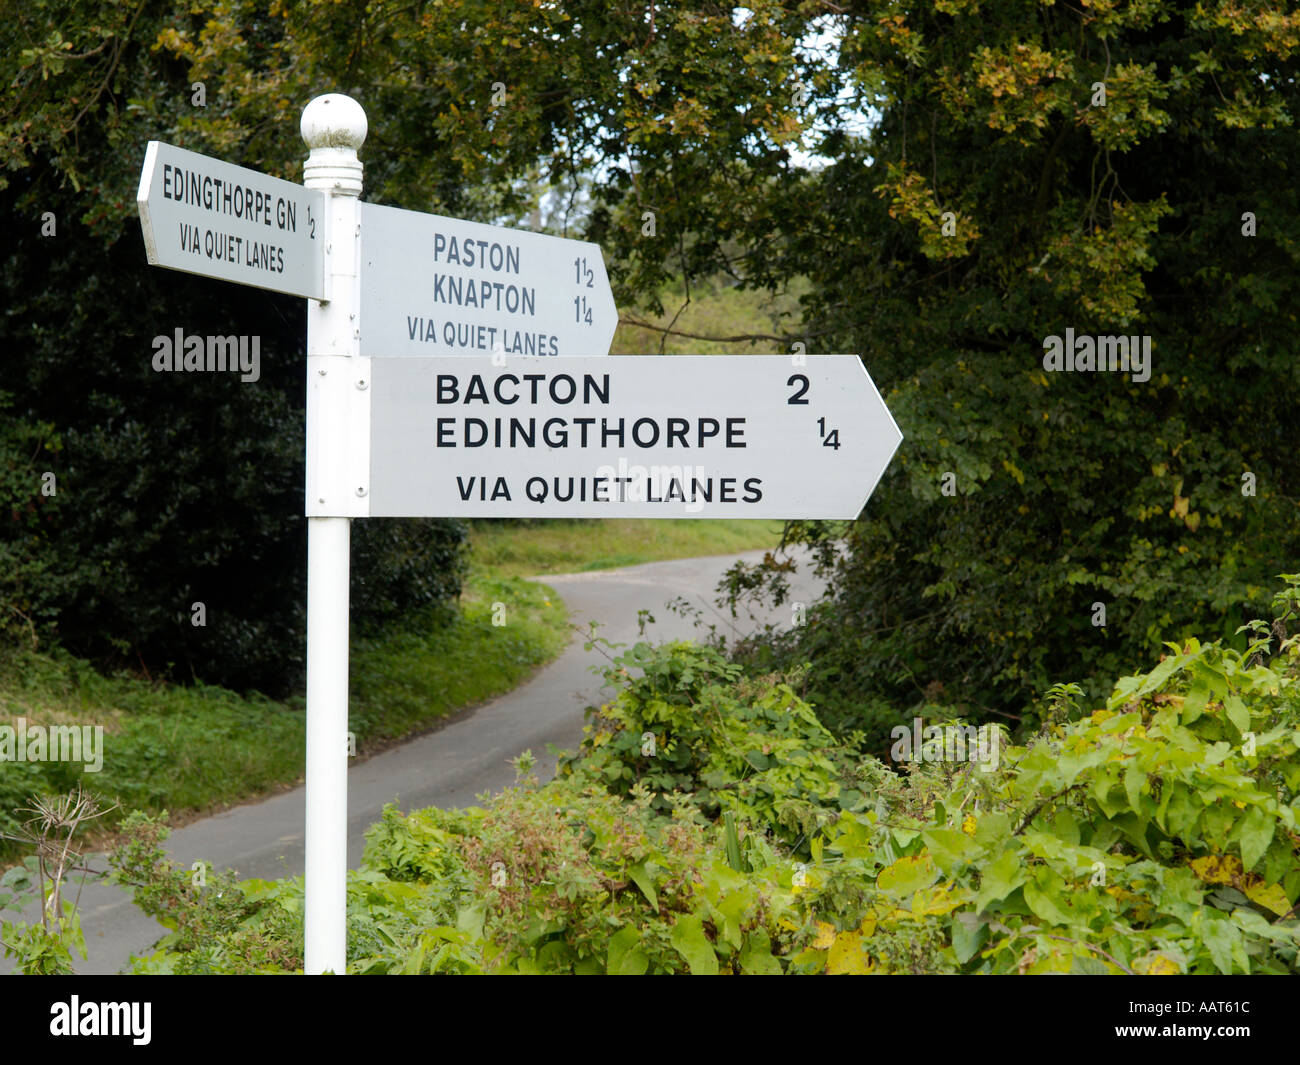 ROAD SIGN SHOWING DIRECTION FOR QUIET LANES AND THE VILLAGES OF PASTON BACTON EDINGTHORPE KNAPTON IN MILES NORFOLK EAST ANGLIA Stock Photo